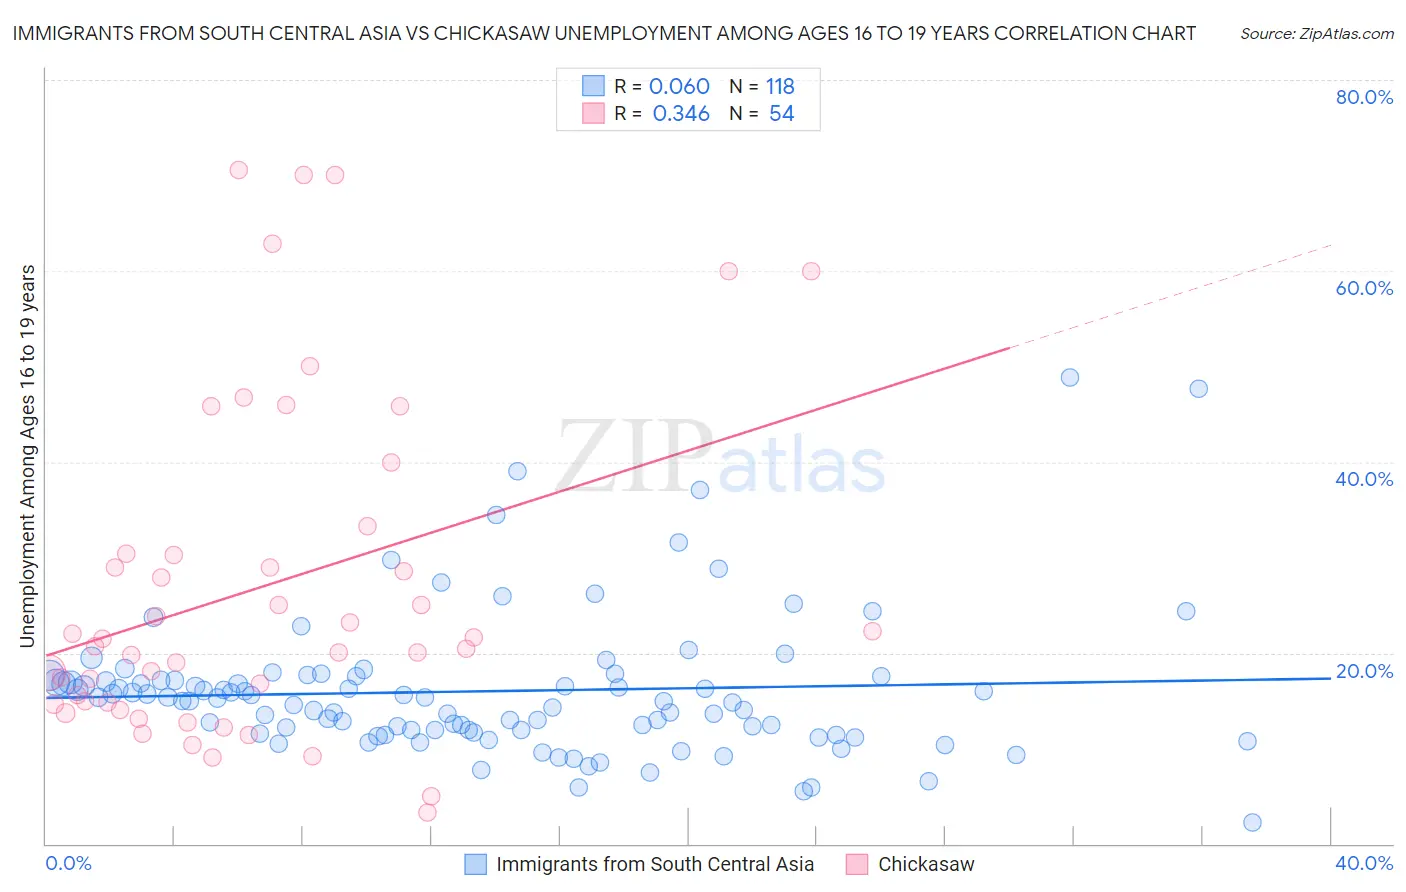 Immigrants from South Central Asia vs Chickasaw Unemployment Among Ages 16 to 19 years